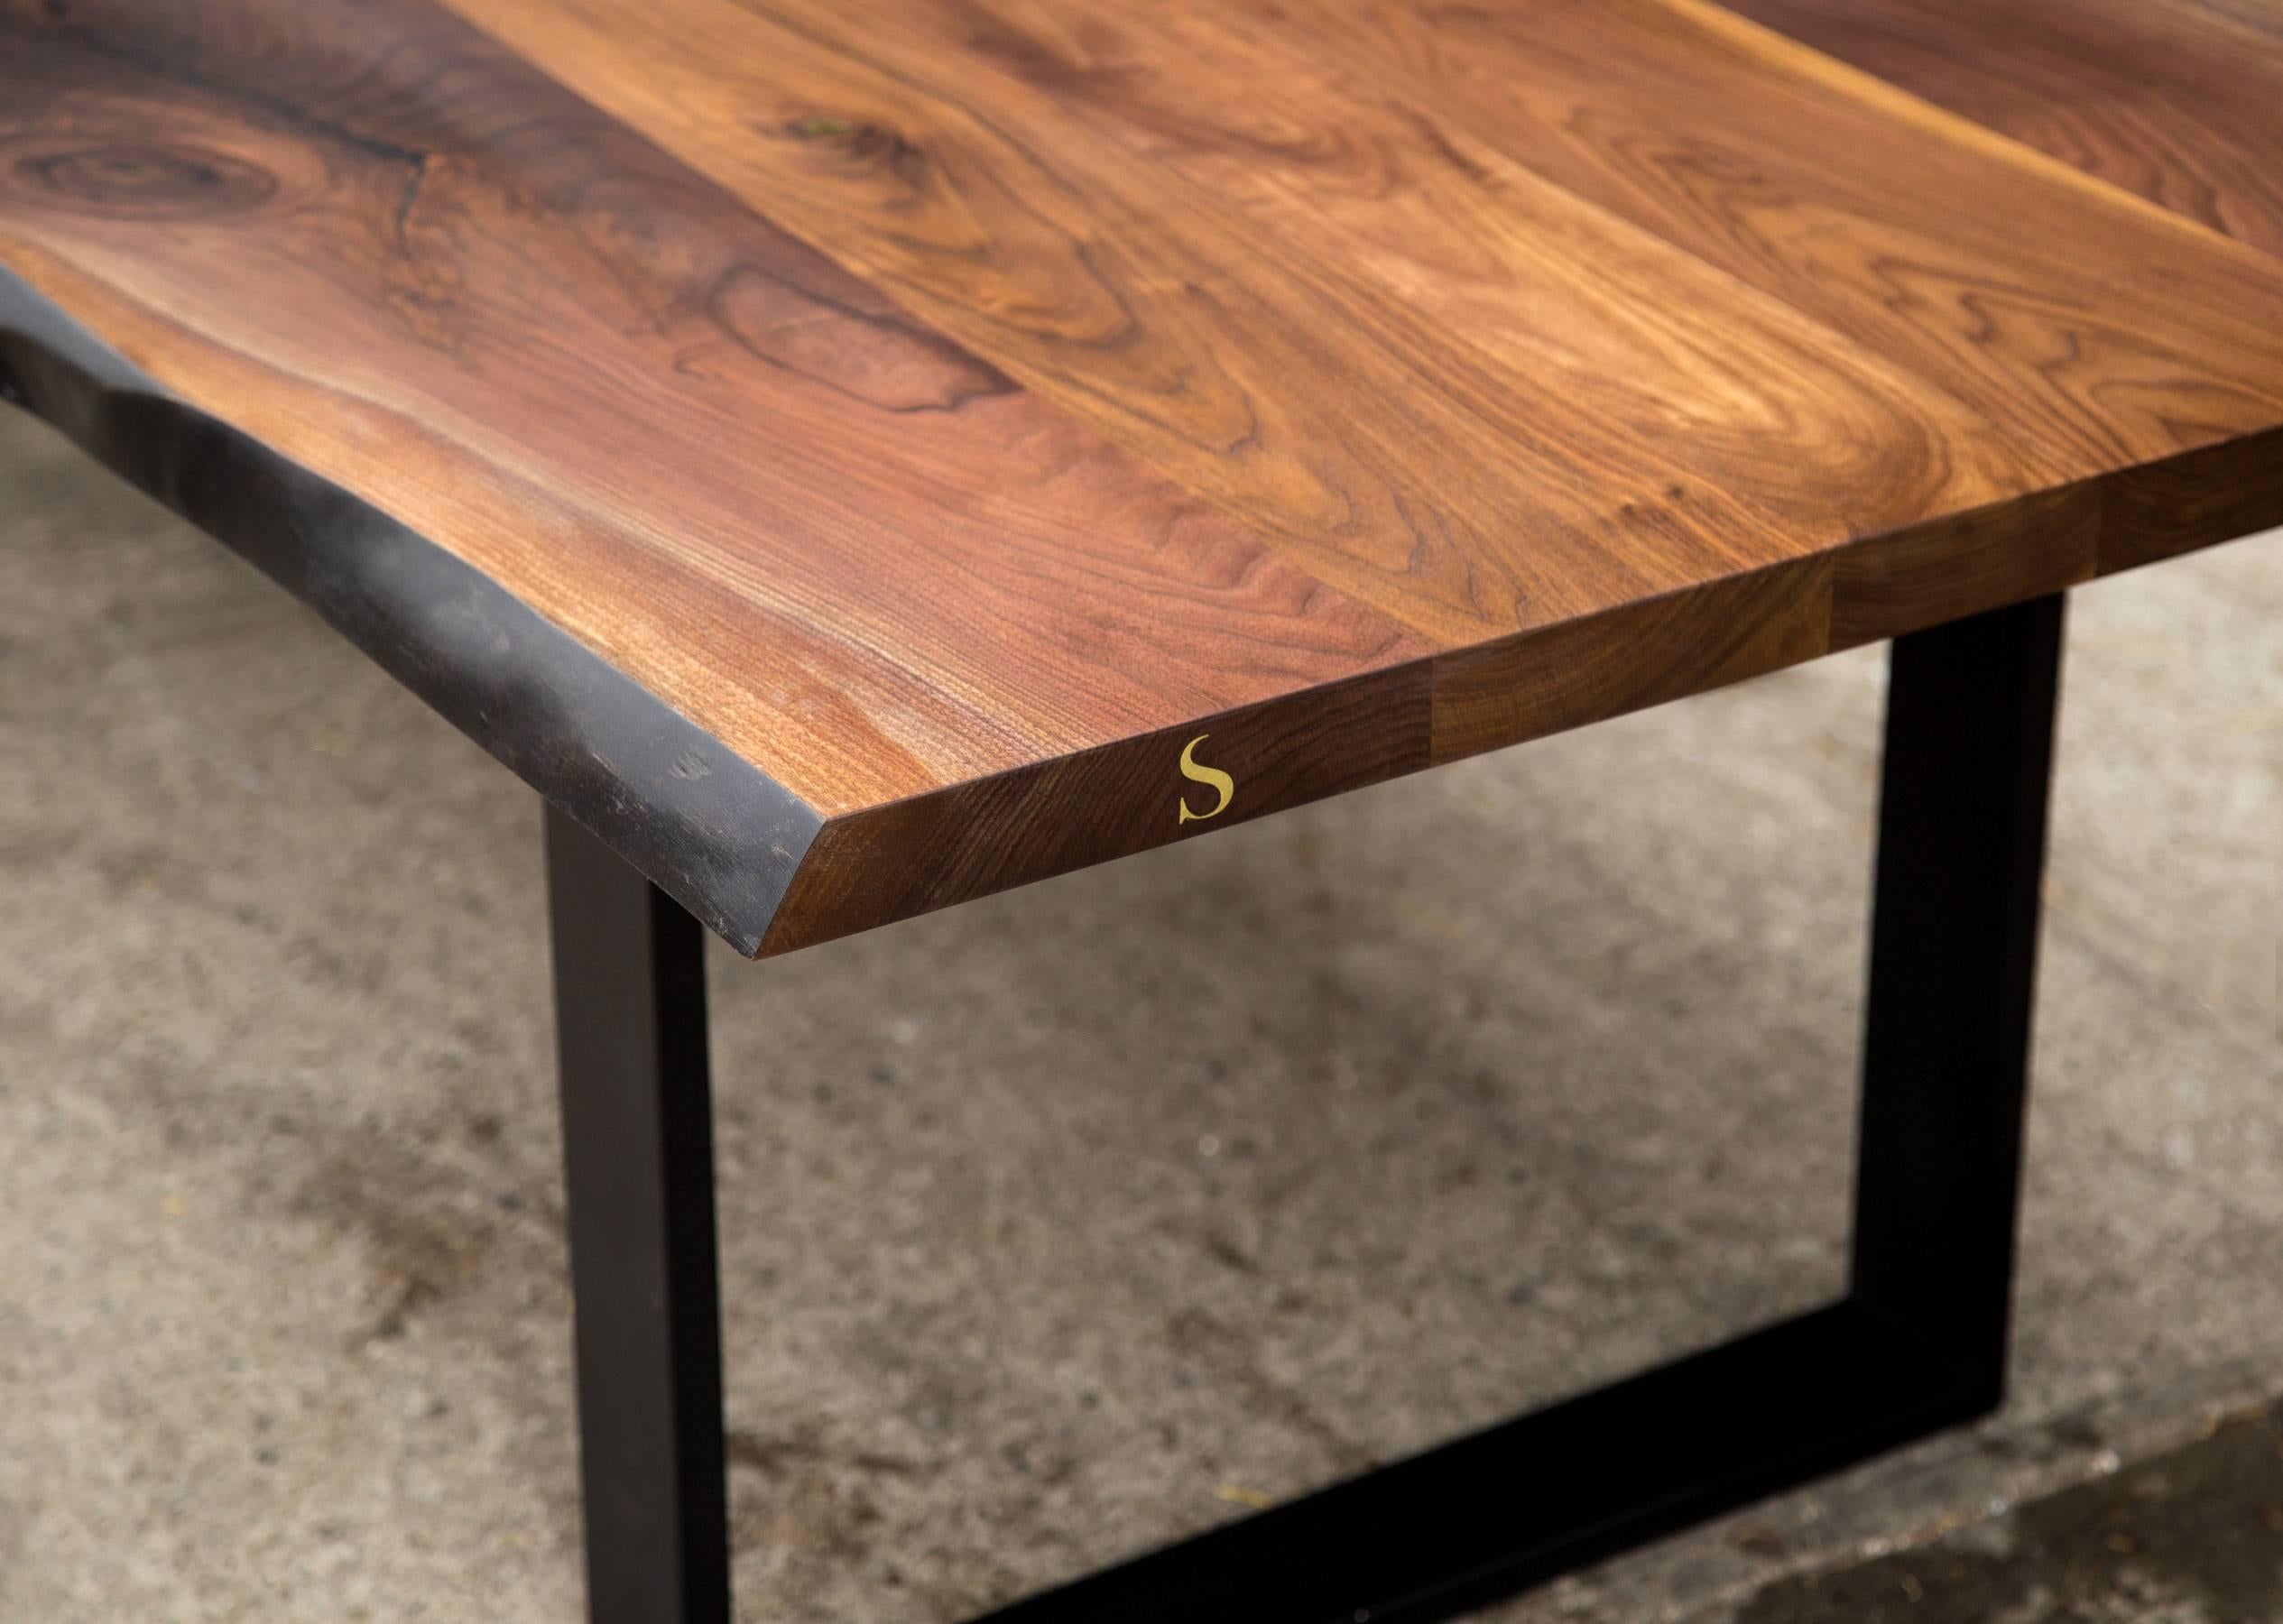 Sentient Signature Live Edge American Black Walnut Slab Table Steel Frame Legs In New Condition For Sale In Brooklyn, NY